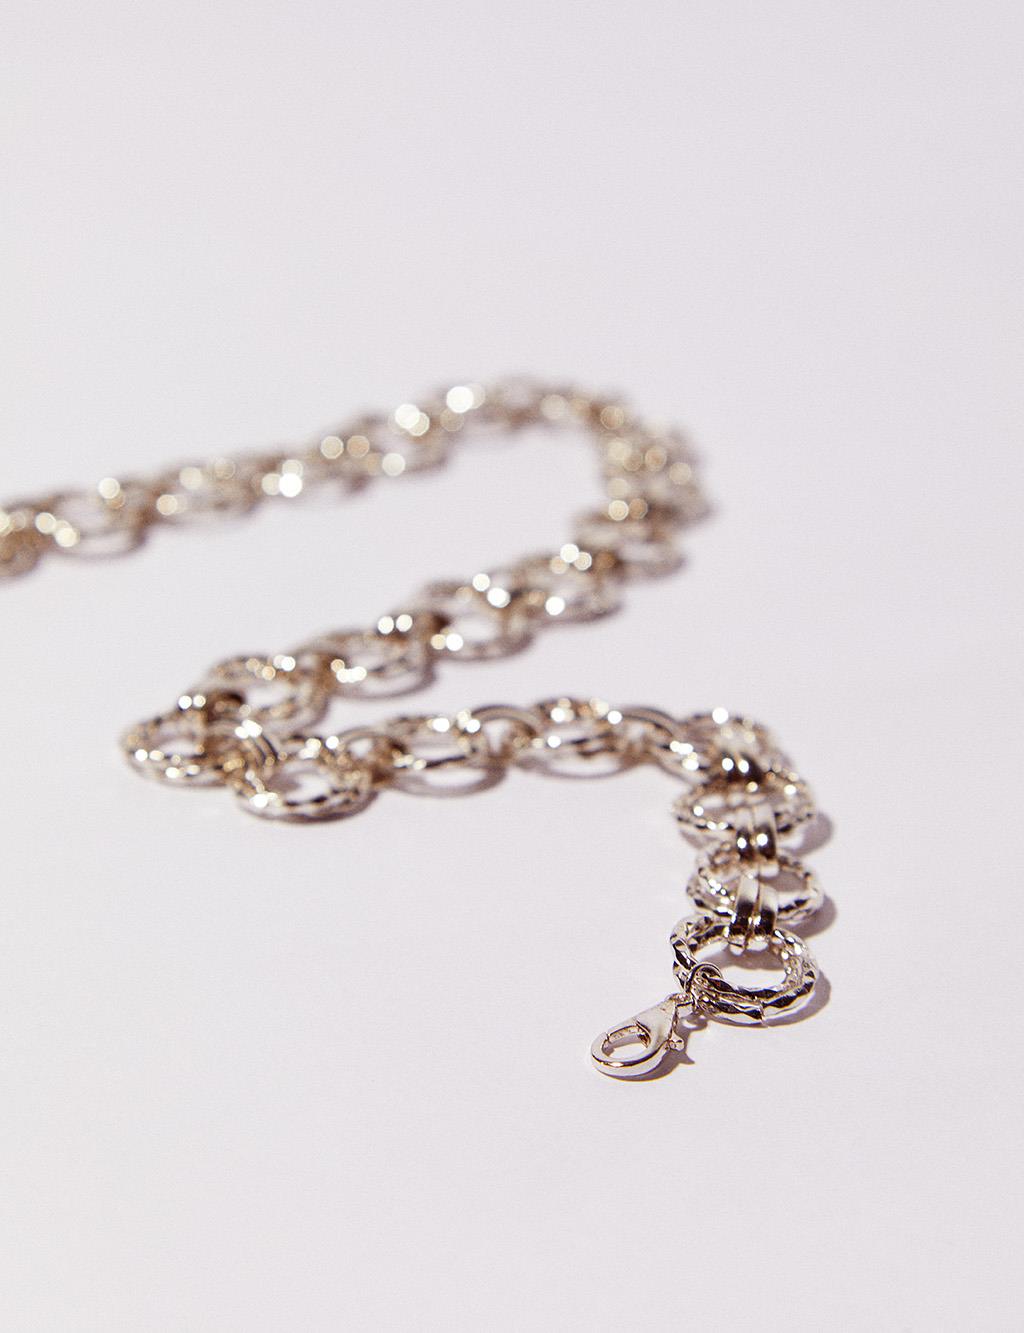 Chain Necklace Silver